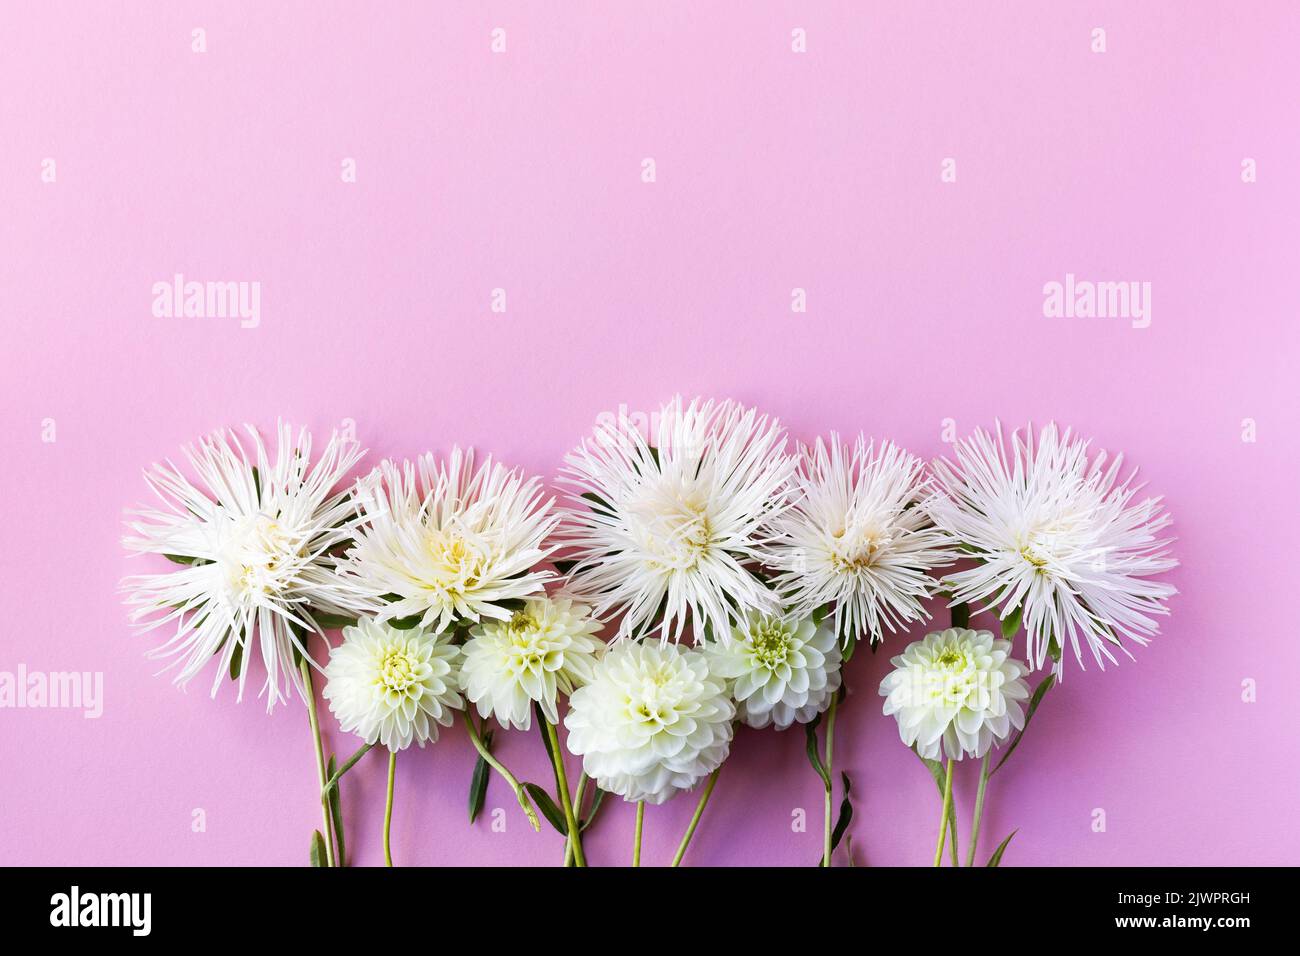 Floral arrangement of white aster and dahlia flowers on a pink ...